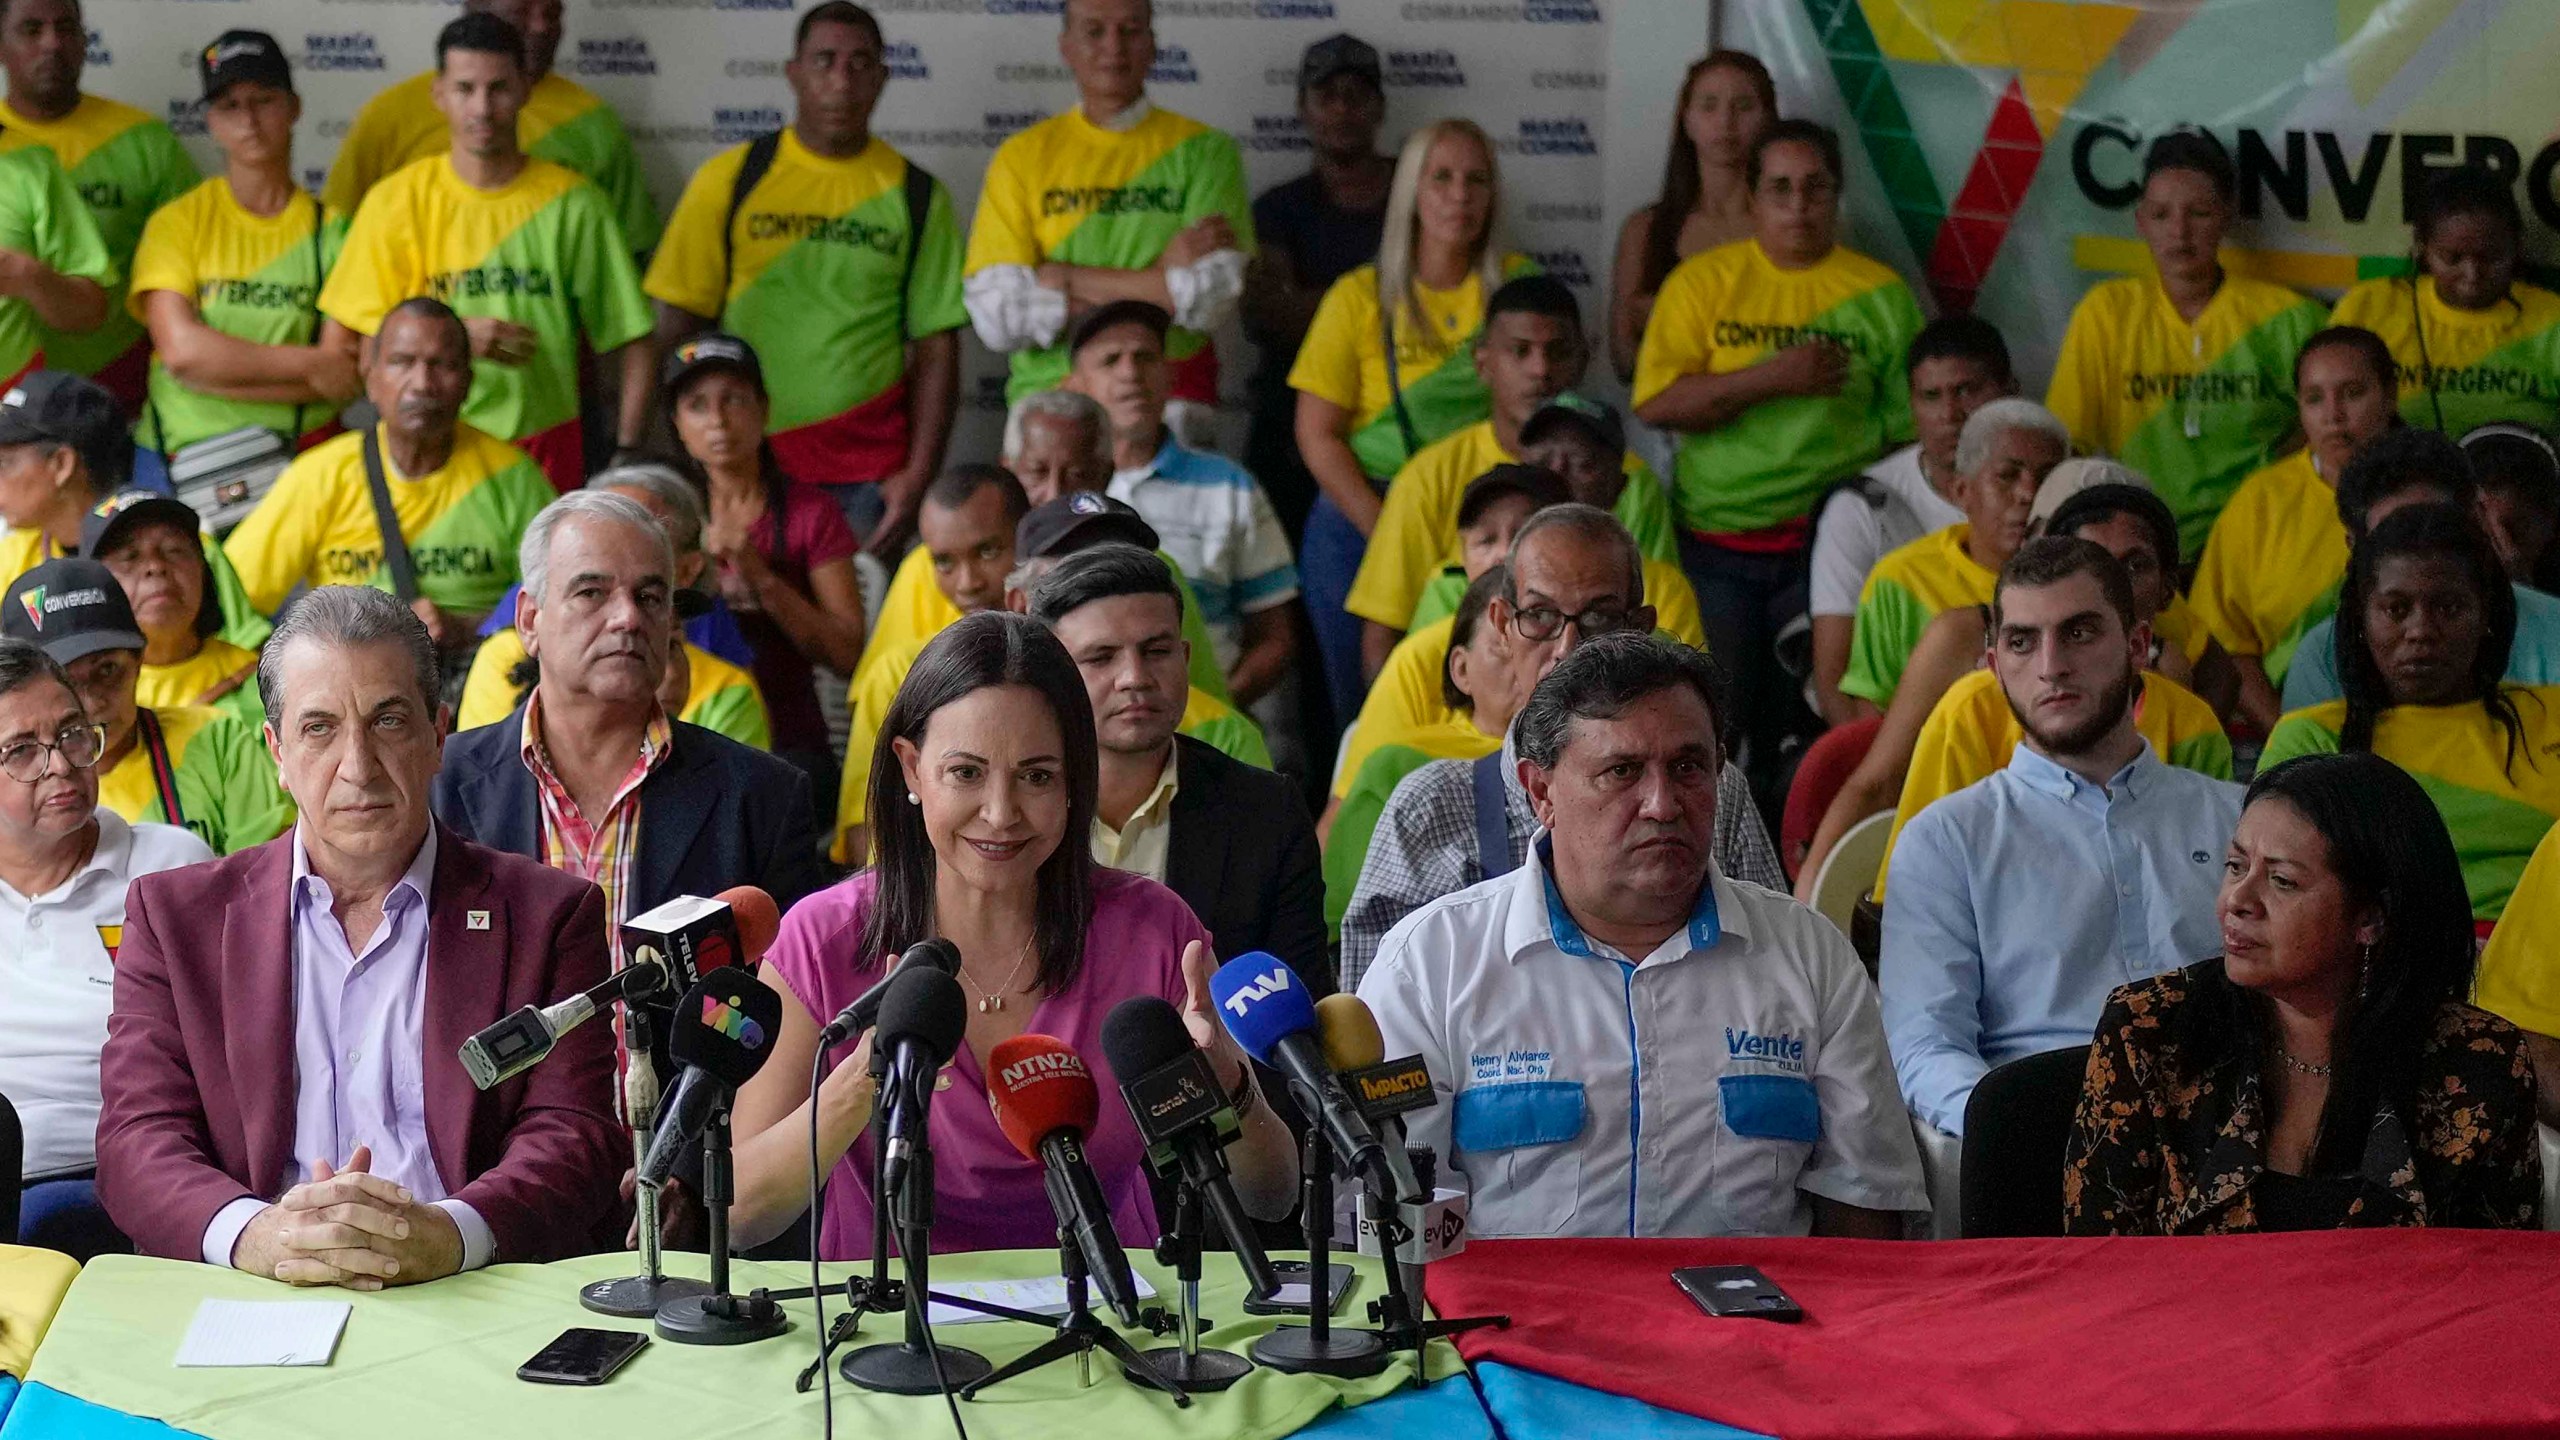 FILE - Opposition presidential hopeful Maria Corina Machado takes part in a press conference accompanied by her national coordinator Henry Alviarez, second from right, and political coordinator Dignora Hernández, right, in Caracas, Venezuela, Sept. 6, 2023. Venezuela's attorney general announced on Wednesday, March 20, 2024 that Alviarez and Hernández were arrested, accused of working in a criminal plot against the government. (AP Photo/Matias Delacroix, File)